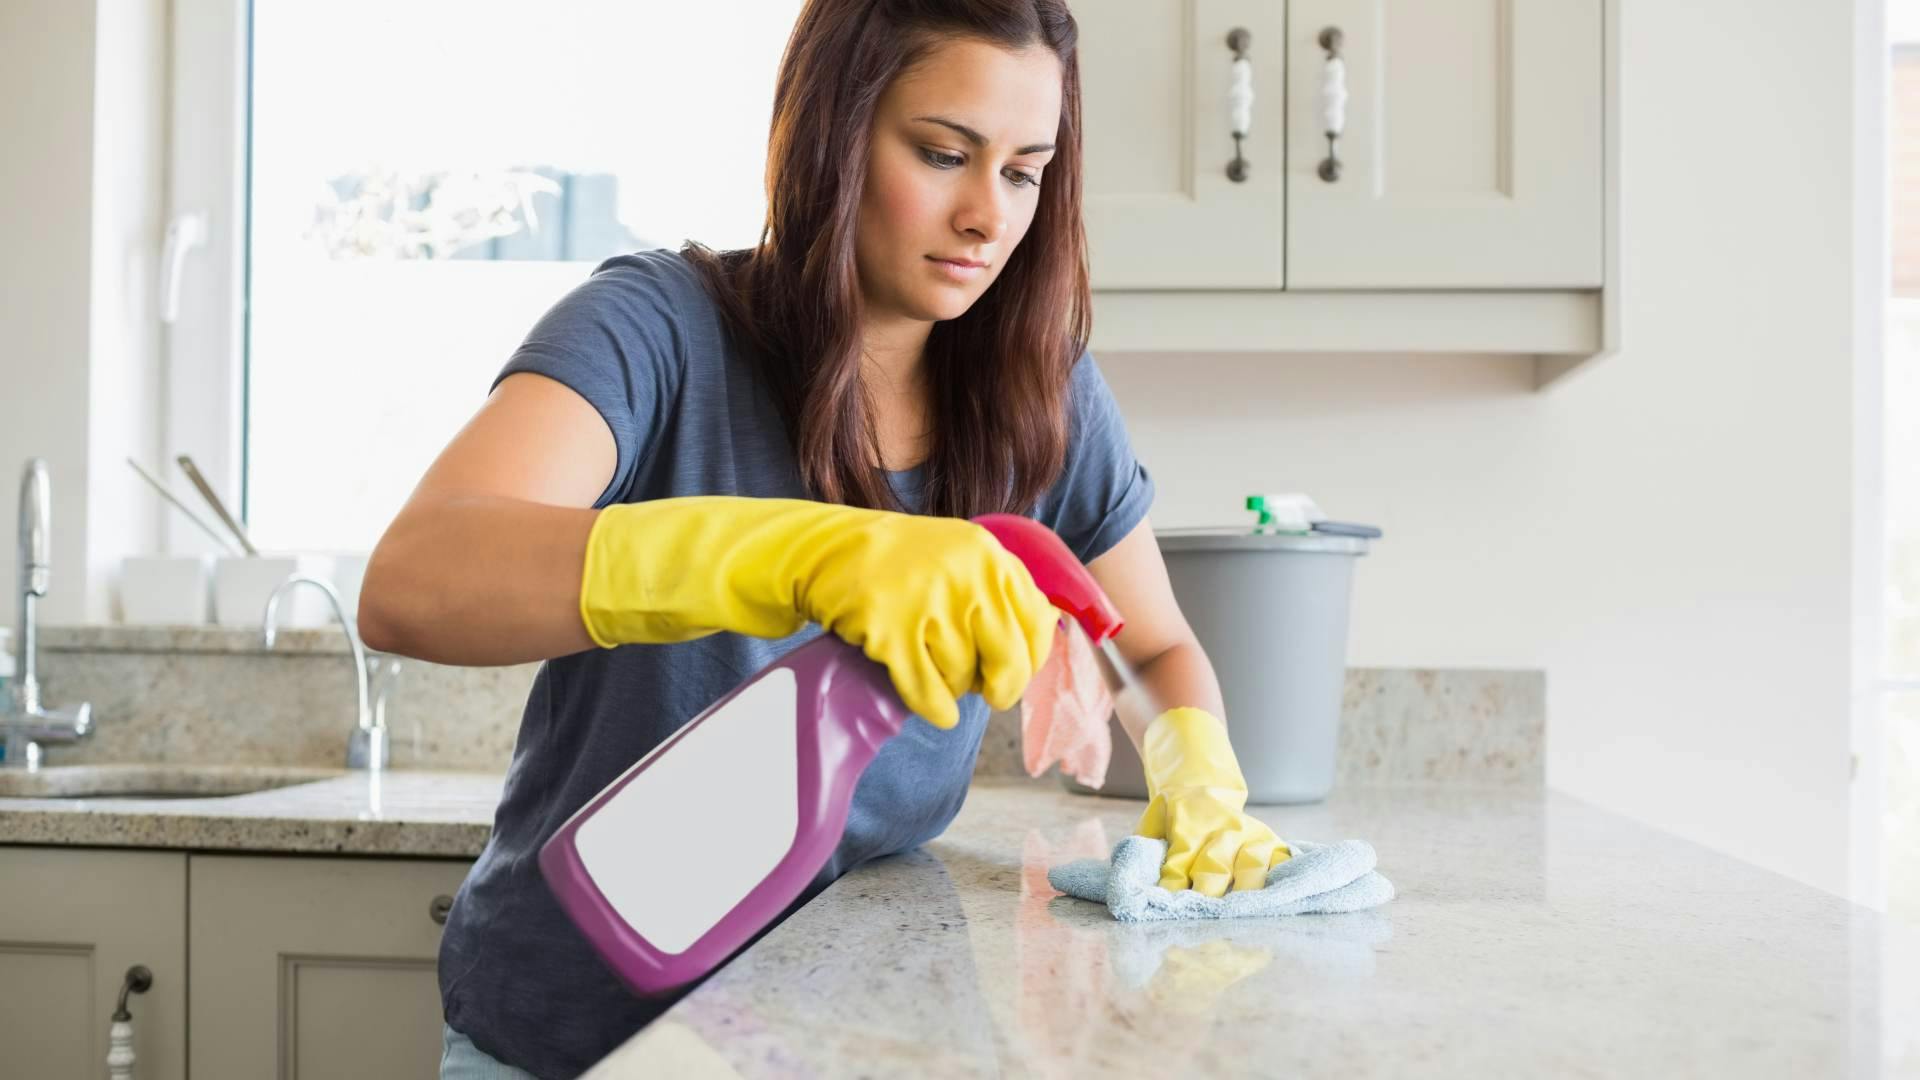 Residential cleaner spraying a sanitizing agent onto a countertop in the kitchen